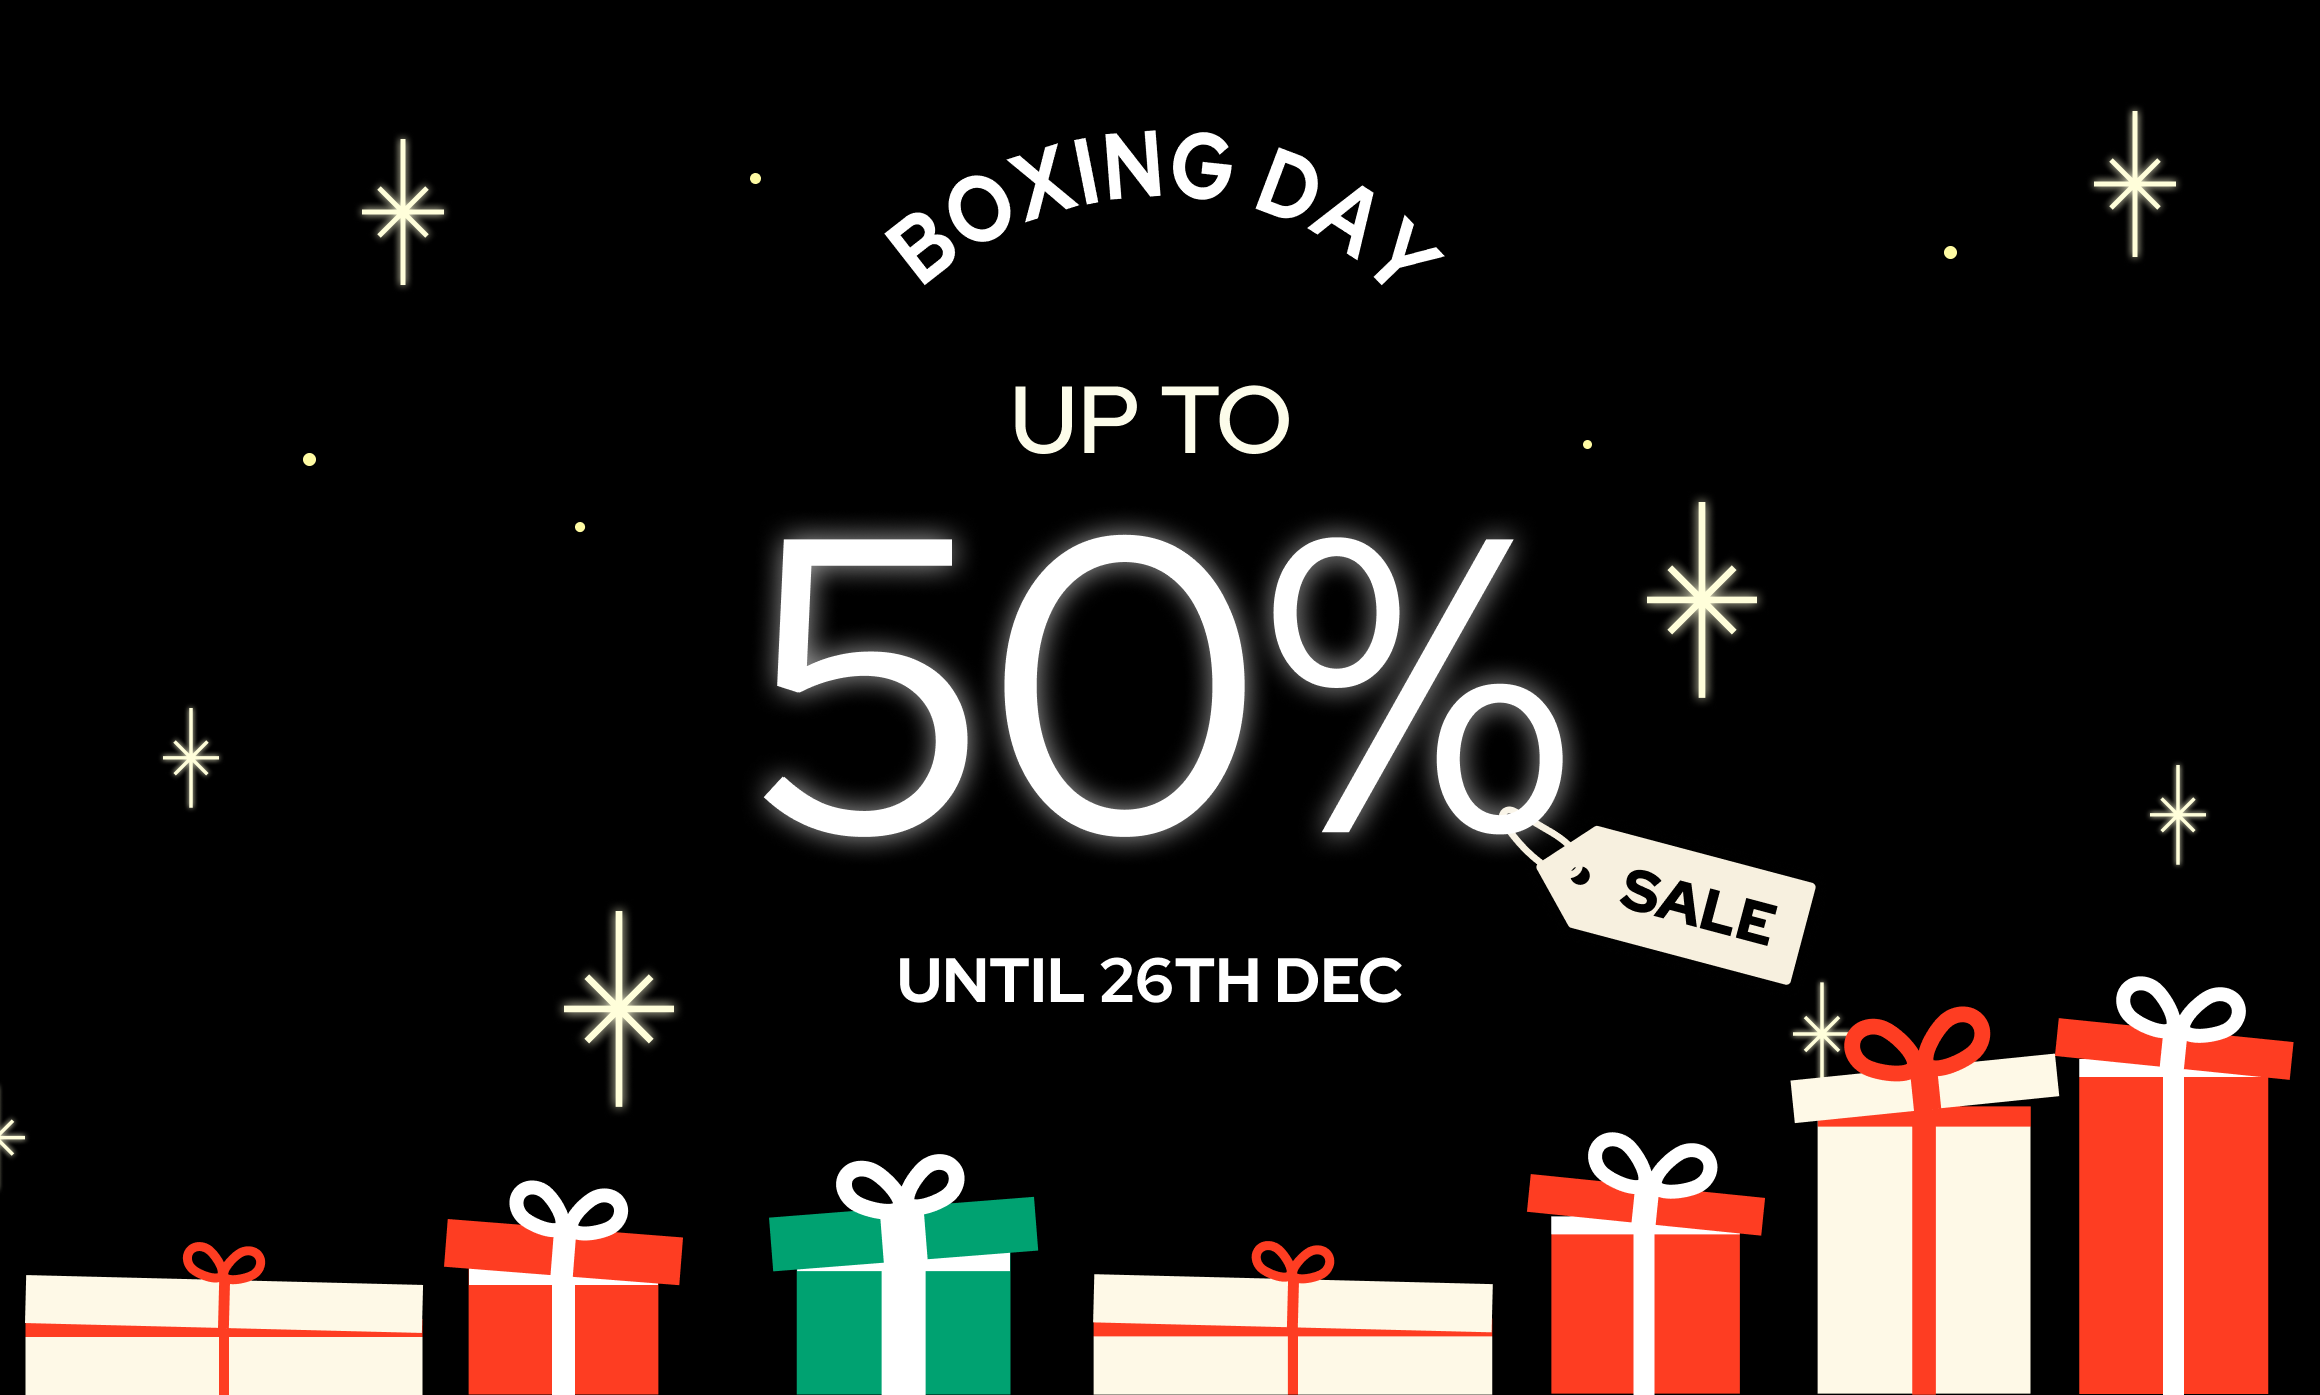 🎉 Discover Joy Early at SOOJIB: Boxing Day 2023 Deals on K-Pop and K-Beauty! 🎁